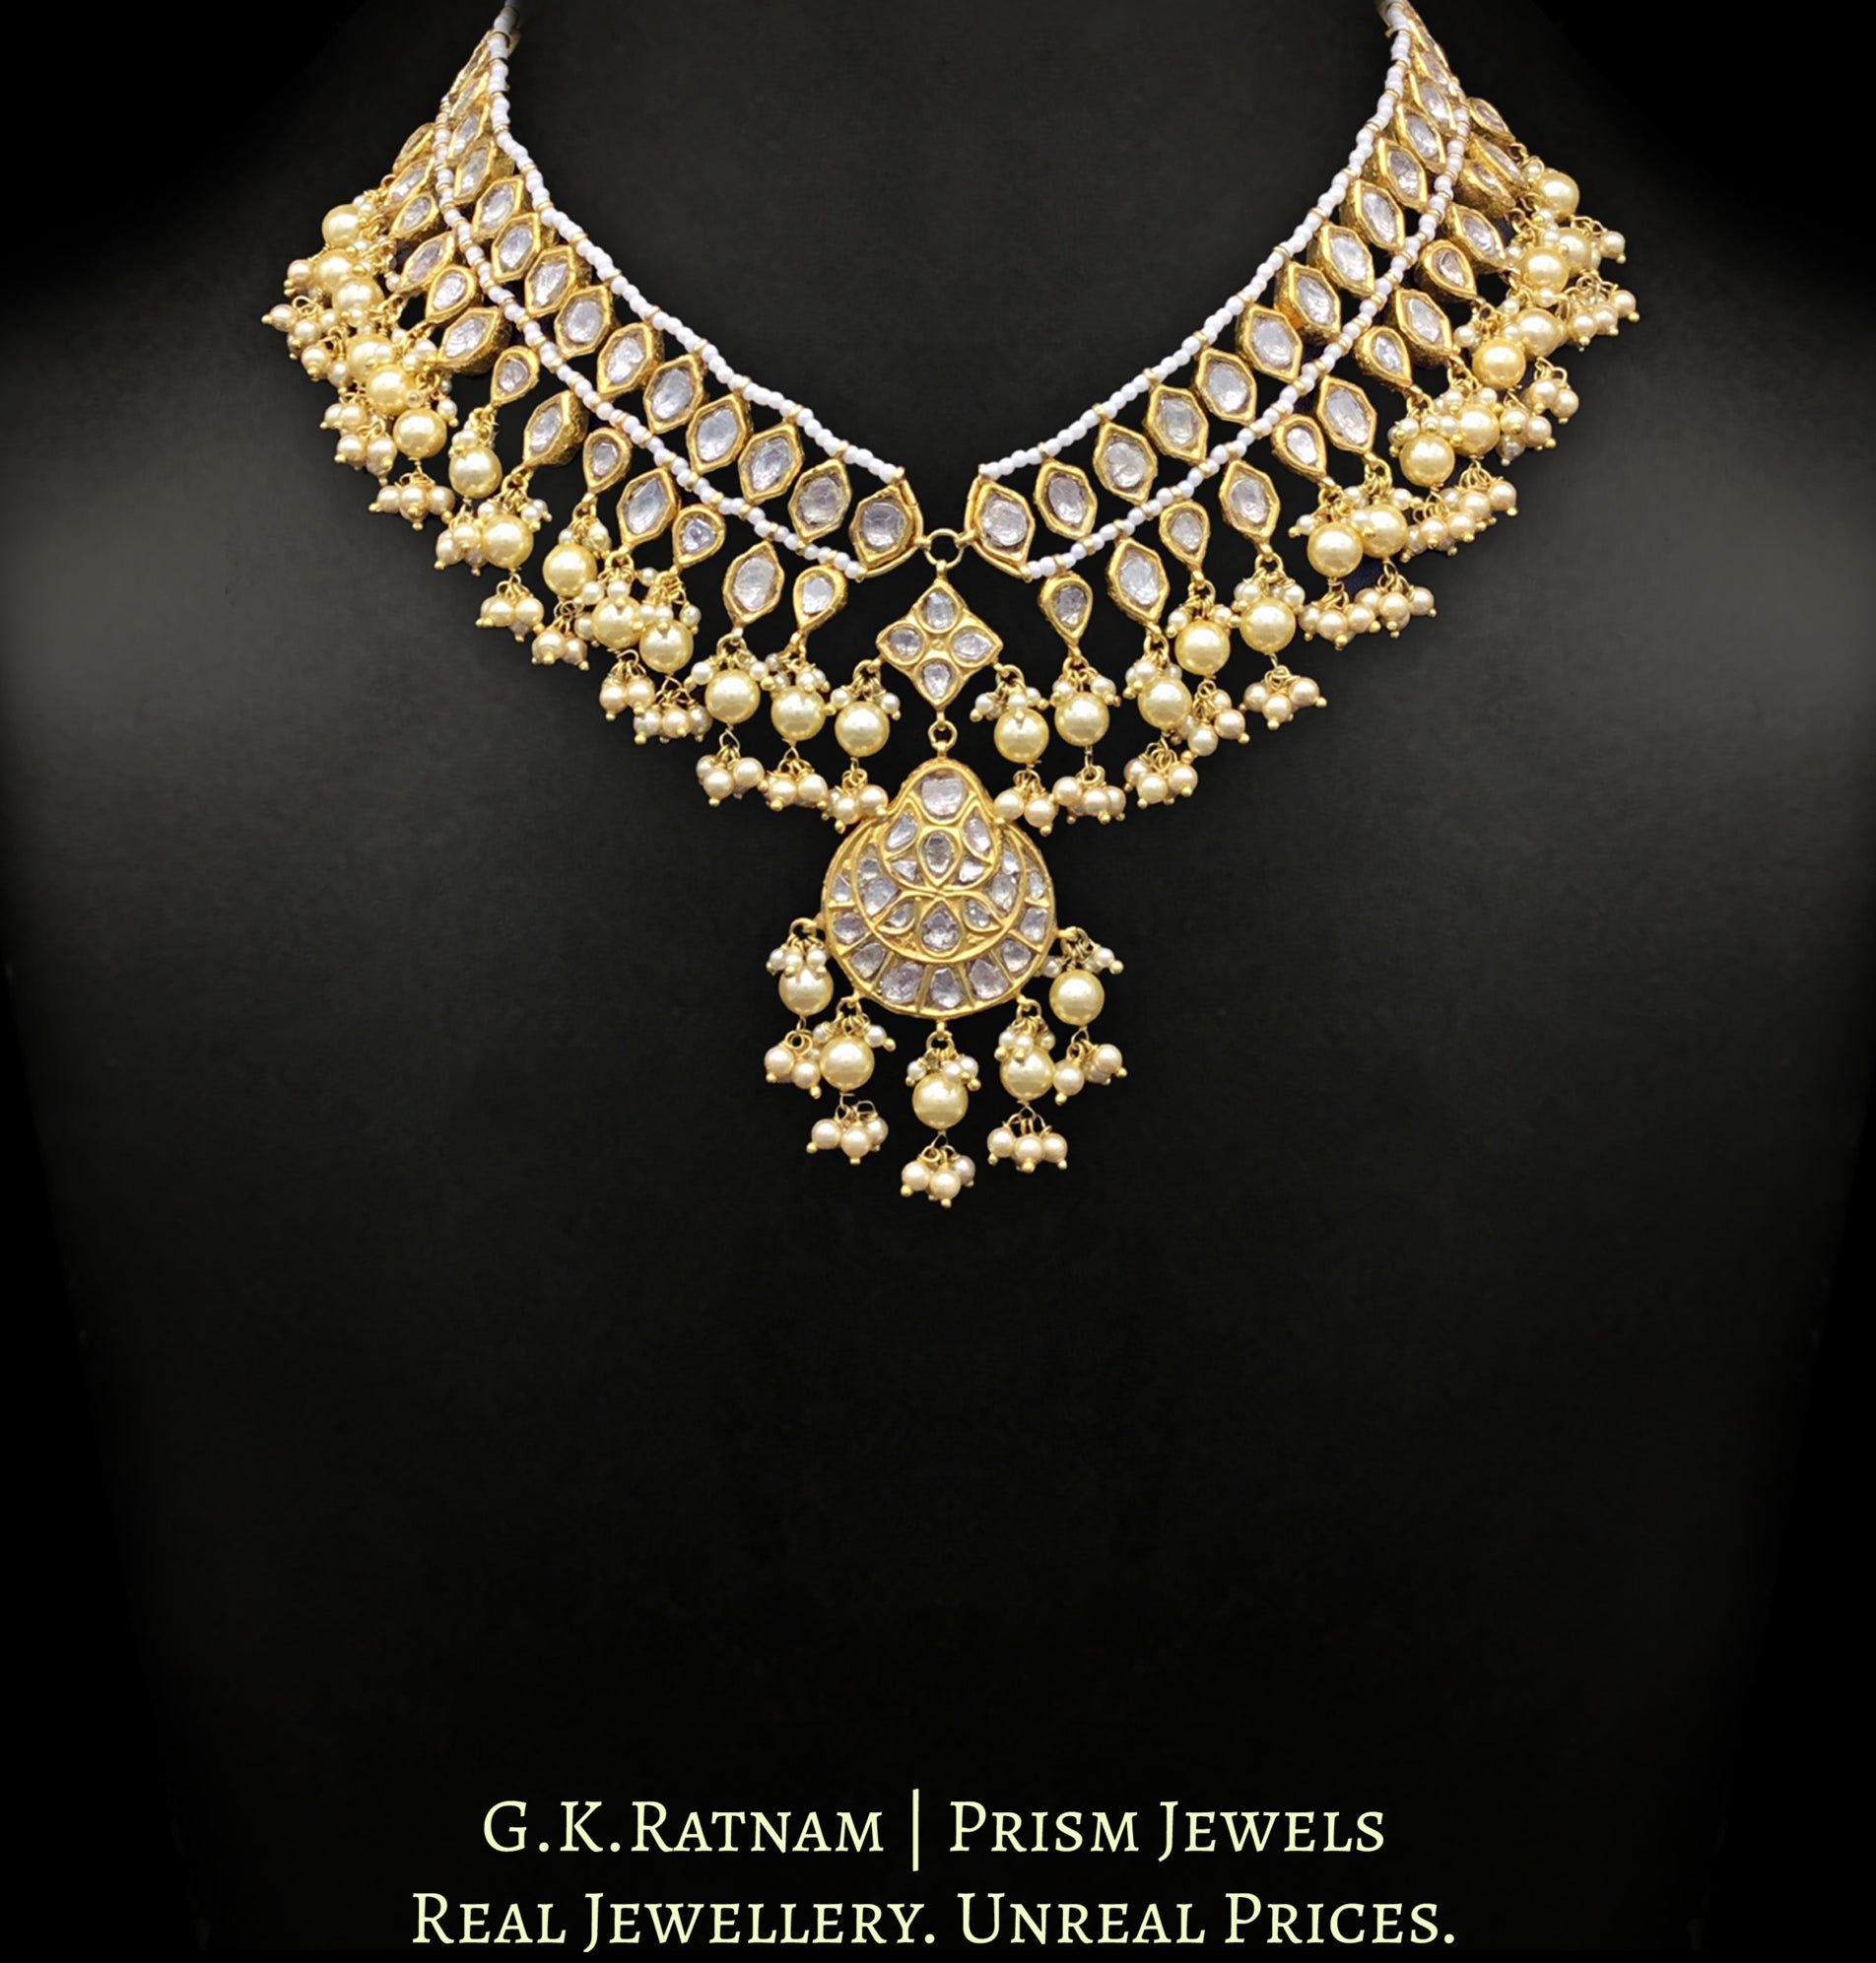 23k Gold and Diamond Polki Matha Patti cum Necklace Set with lustrous south sea like pearls